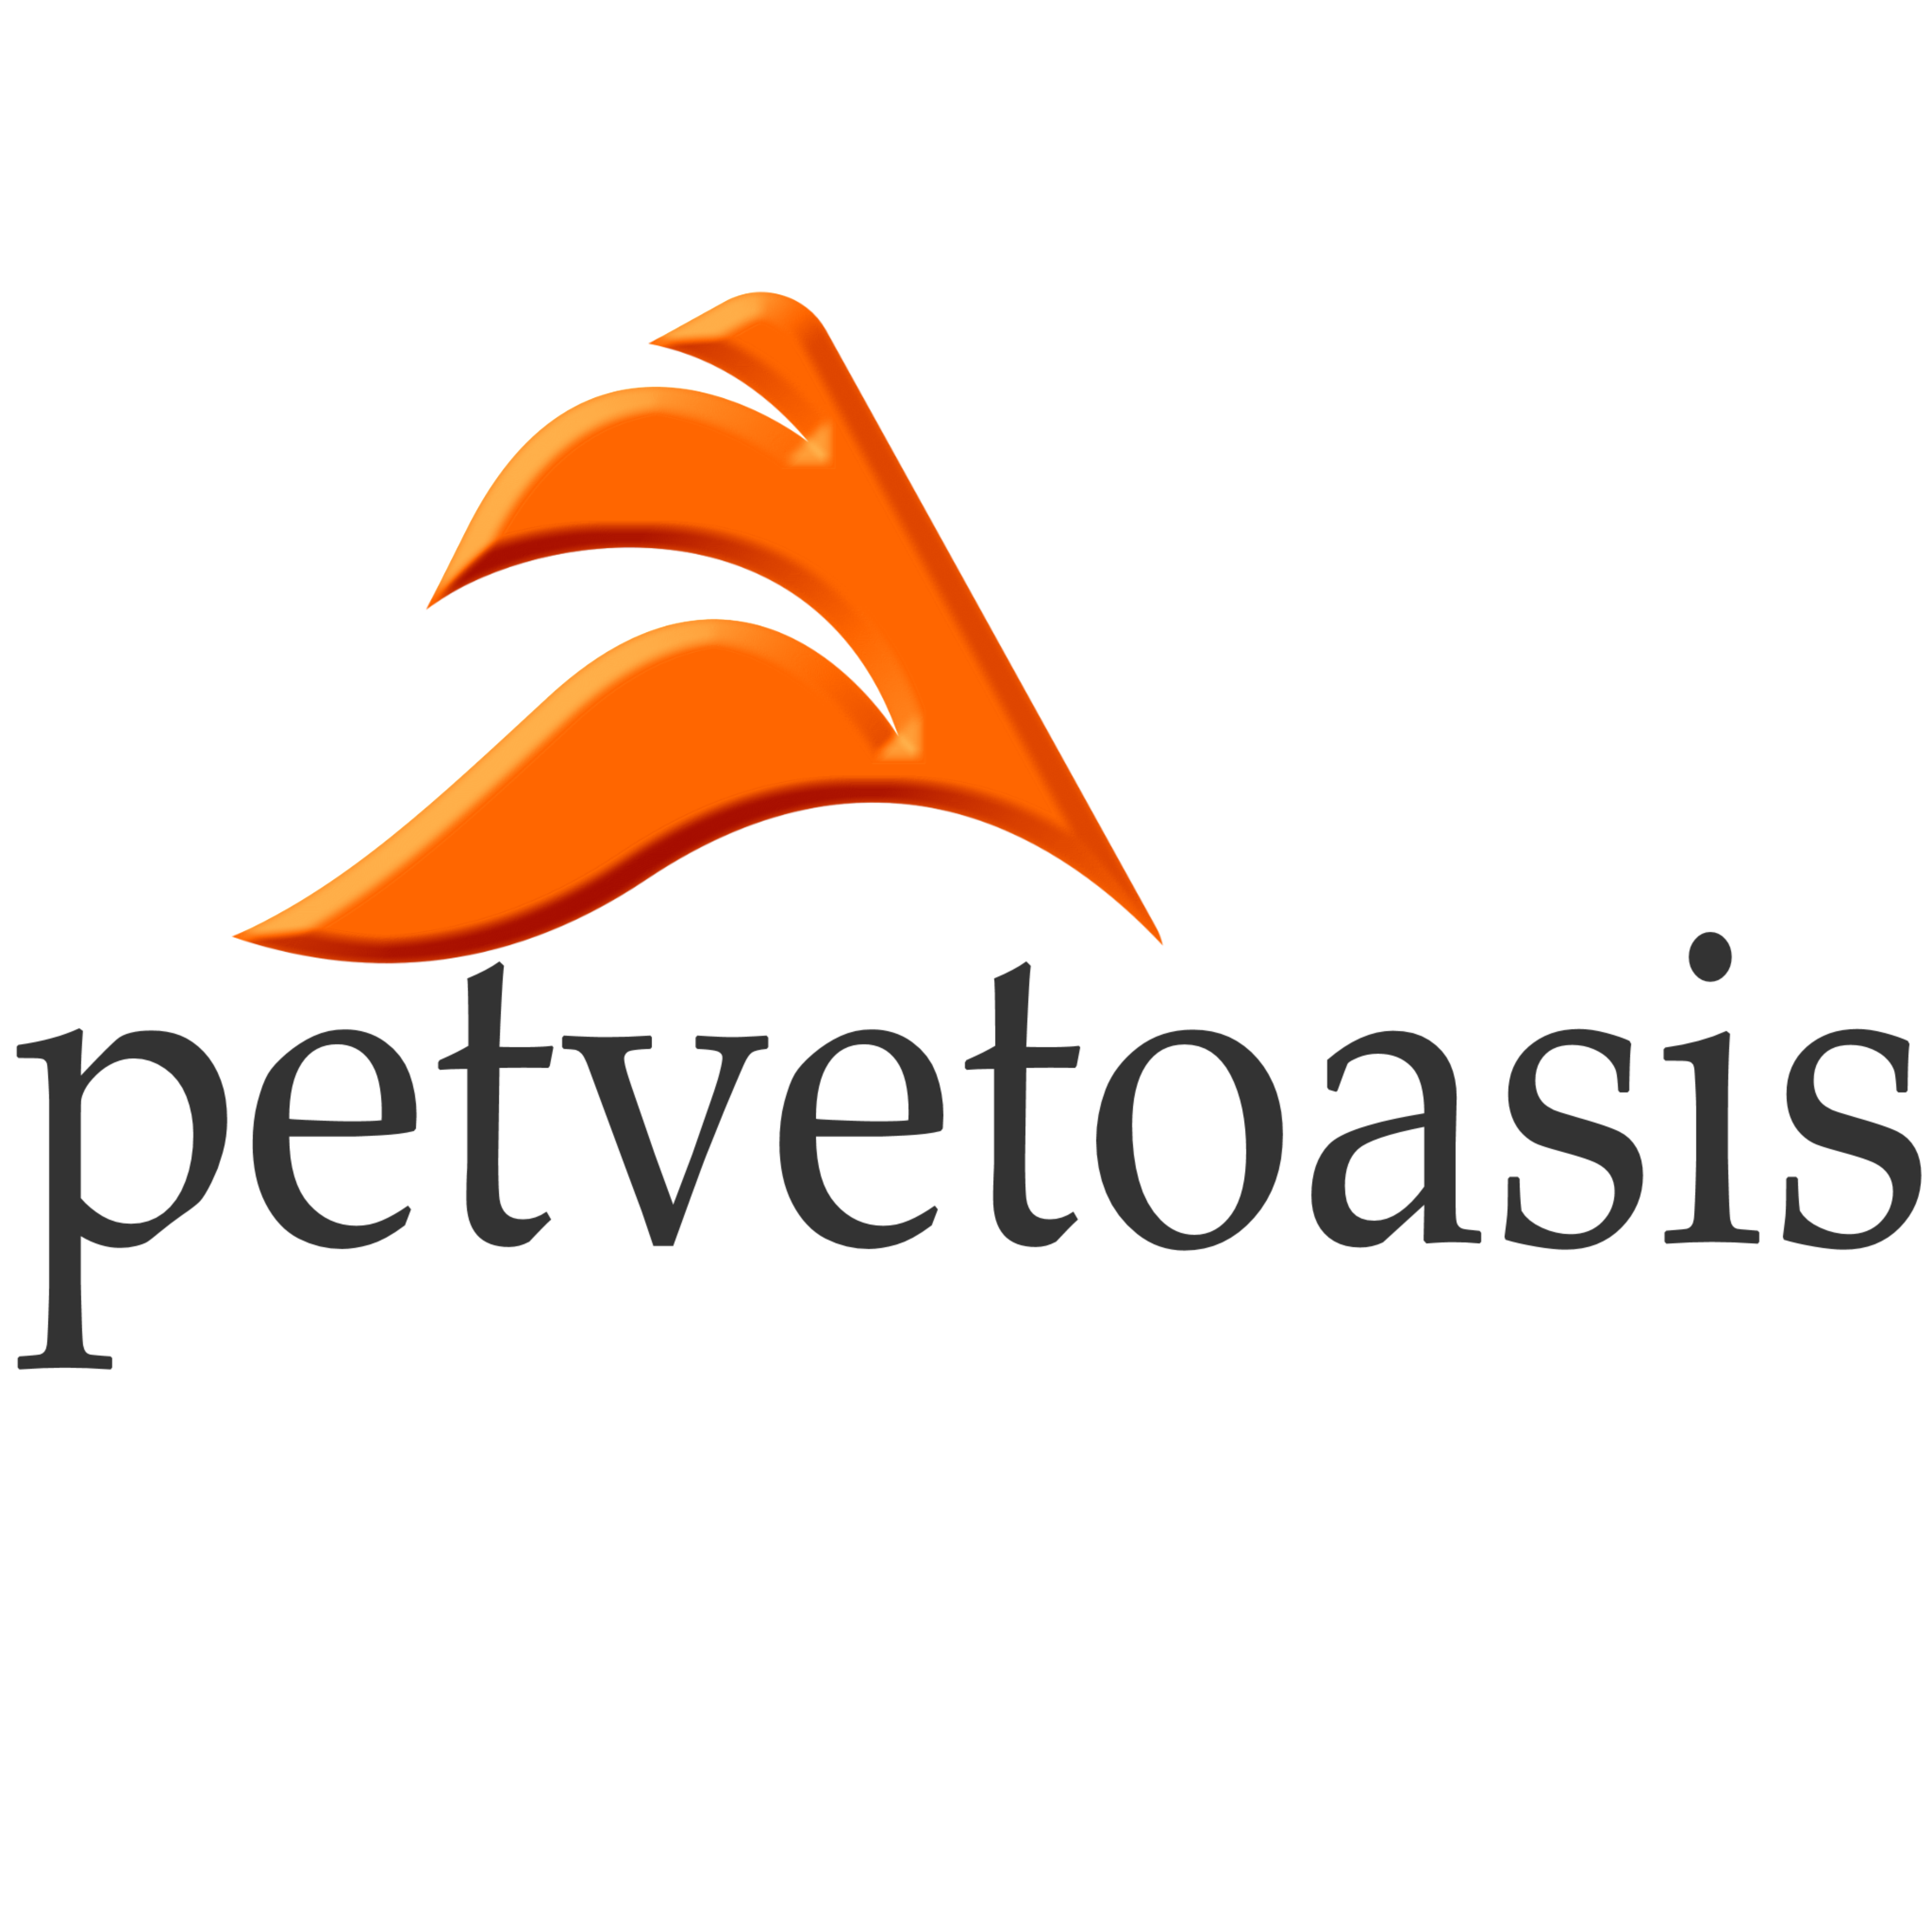 A Complete Source of Pet Health & More!